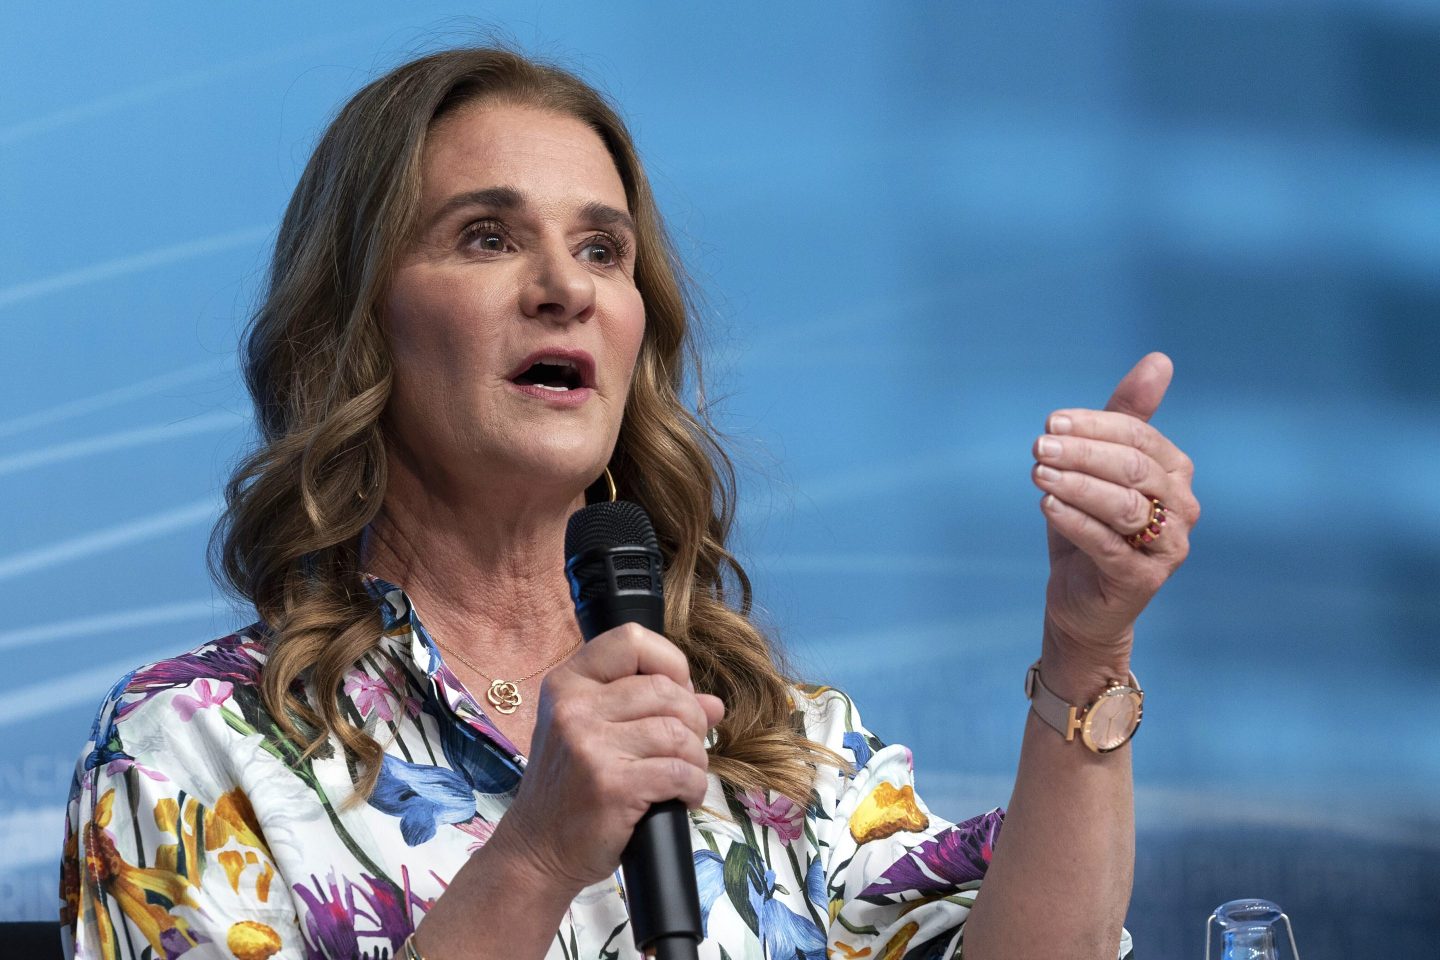 Melinda French Gates speaks at the forum Empowering Women as Entrepreneurs and Leaders during the World Bank/IMF Spring Meetings at the International Monetary Fund (IMF) headquarters in Washington on April 13, 2023.